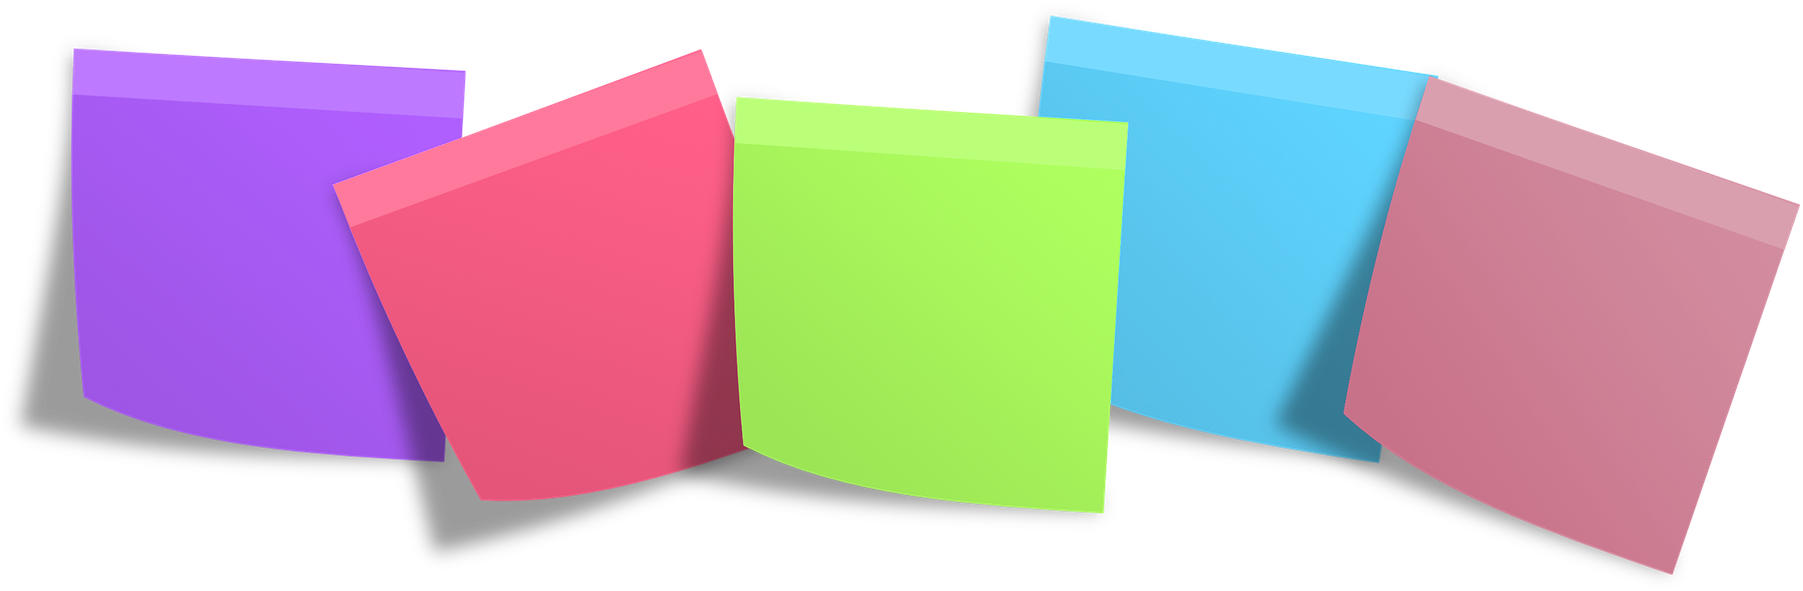 Post-it Note Adhesive Tape Paper Clip Art - Post-it Note Adhesive Tape Paper Clip Art (1920x678)